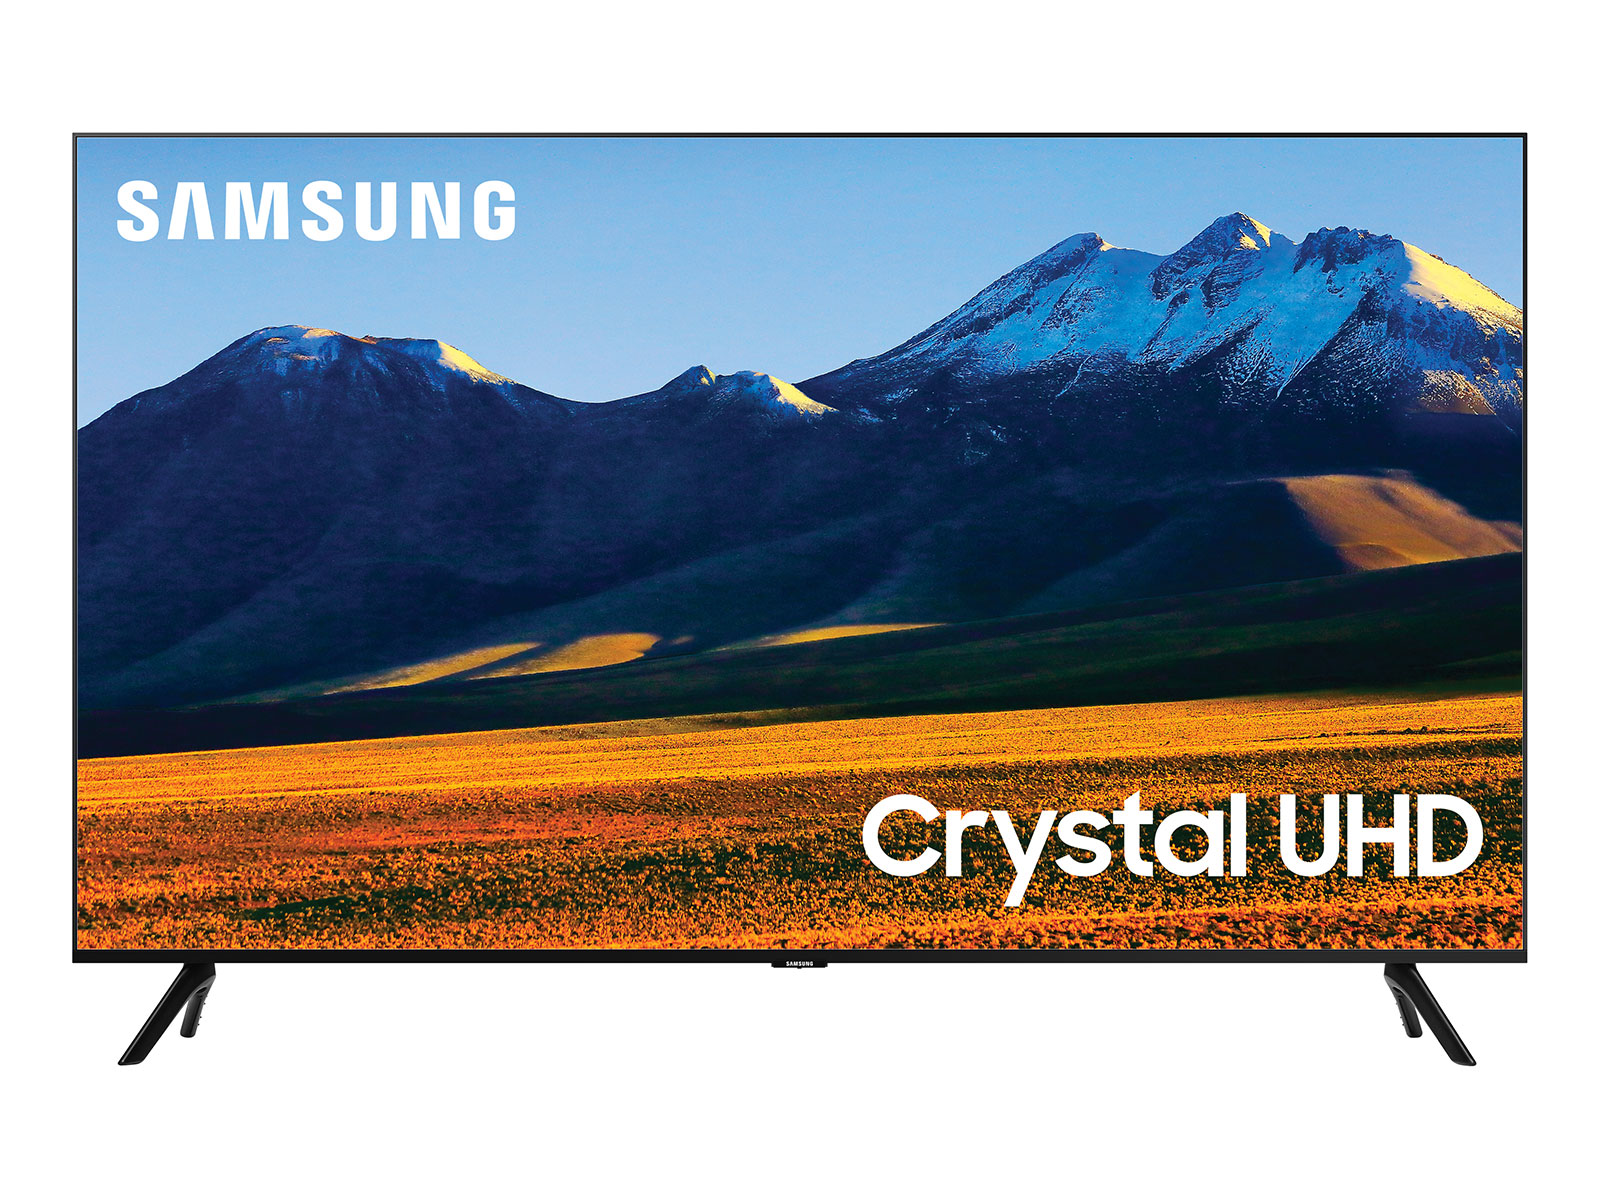 https://image-us.samsung.com/SamsungUS/home/televisions-and-home-theater/tvs/crystal-uhd-tvs/un85tu8000fxza/gallery/01-TU9000_011_Front3_Black-Metal-Gallery-1600x1200.jpg?$product-details-jpg$